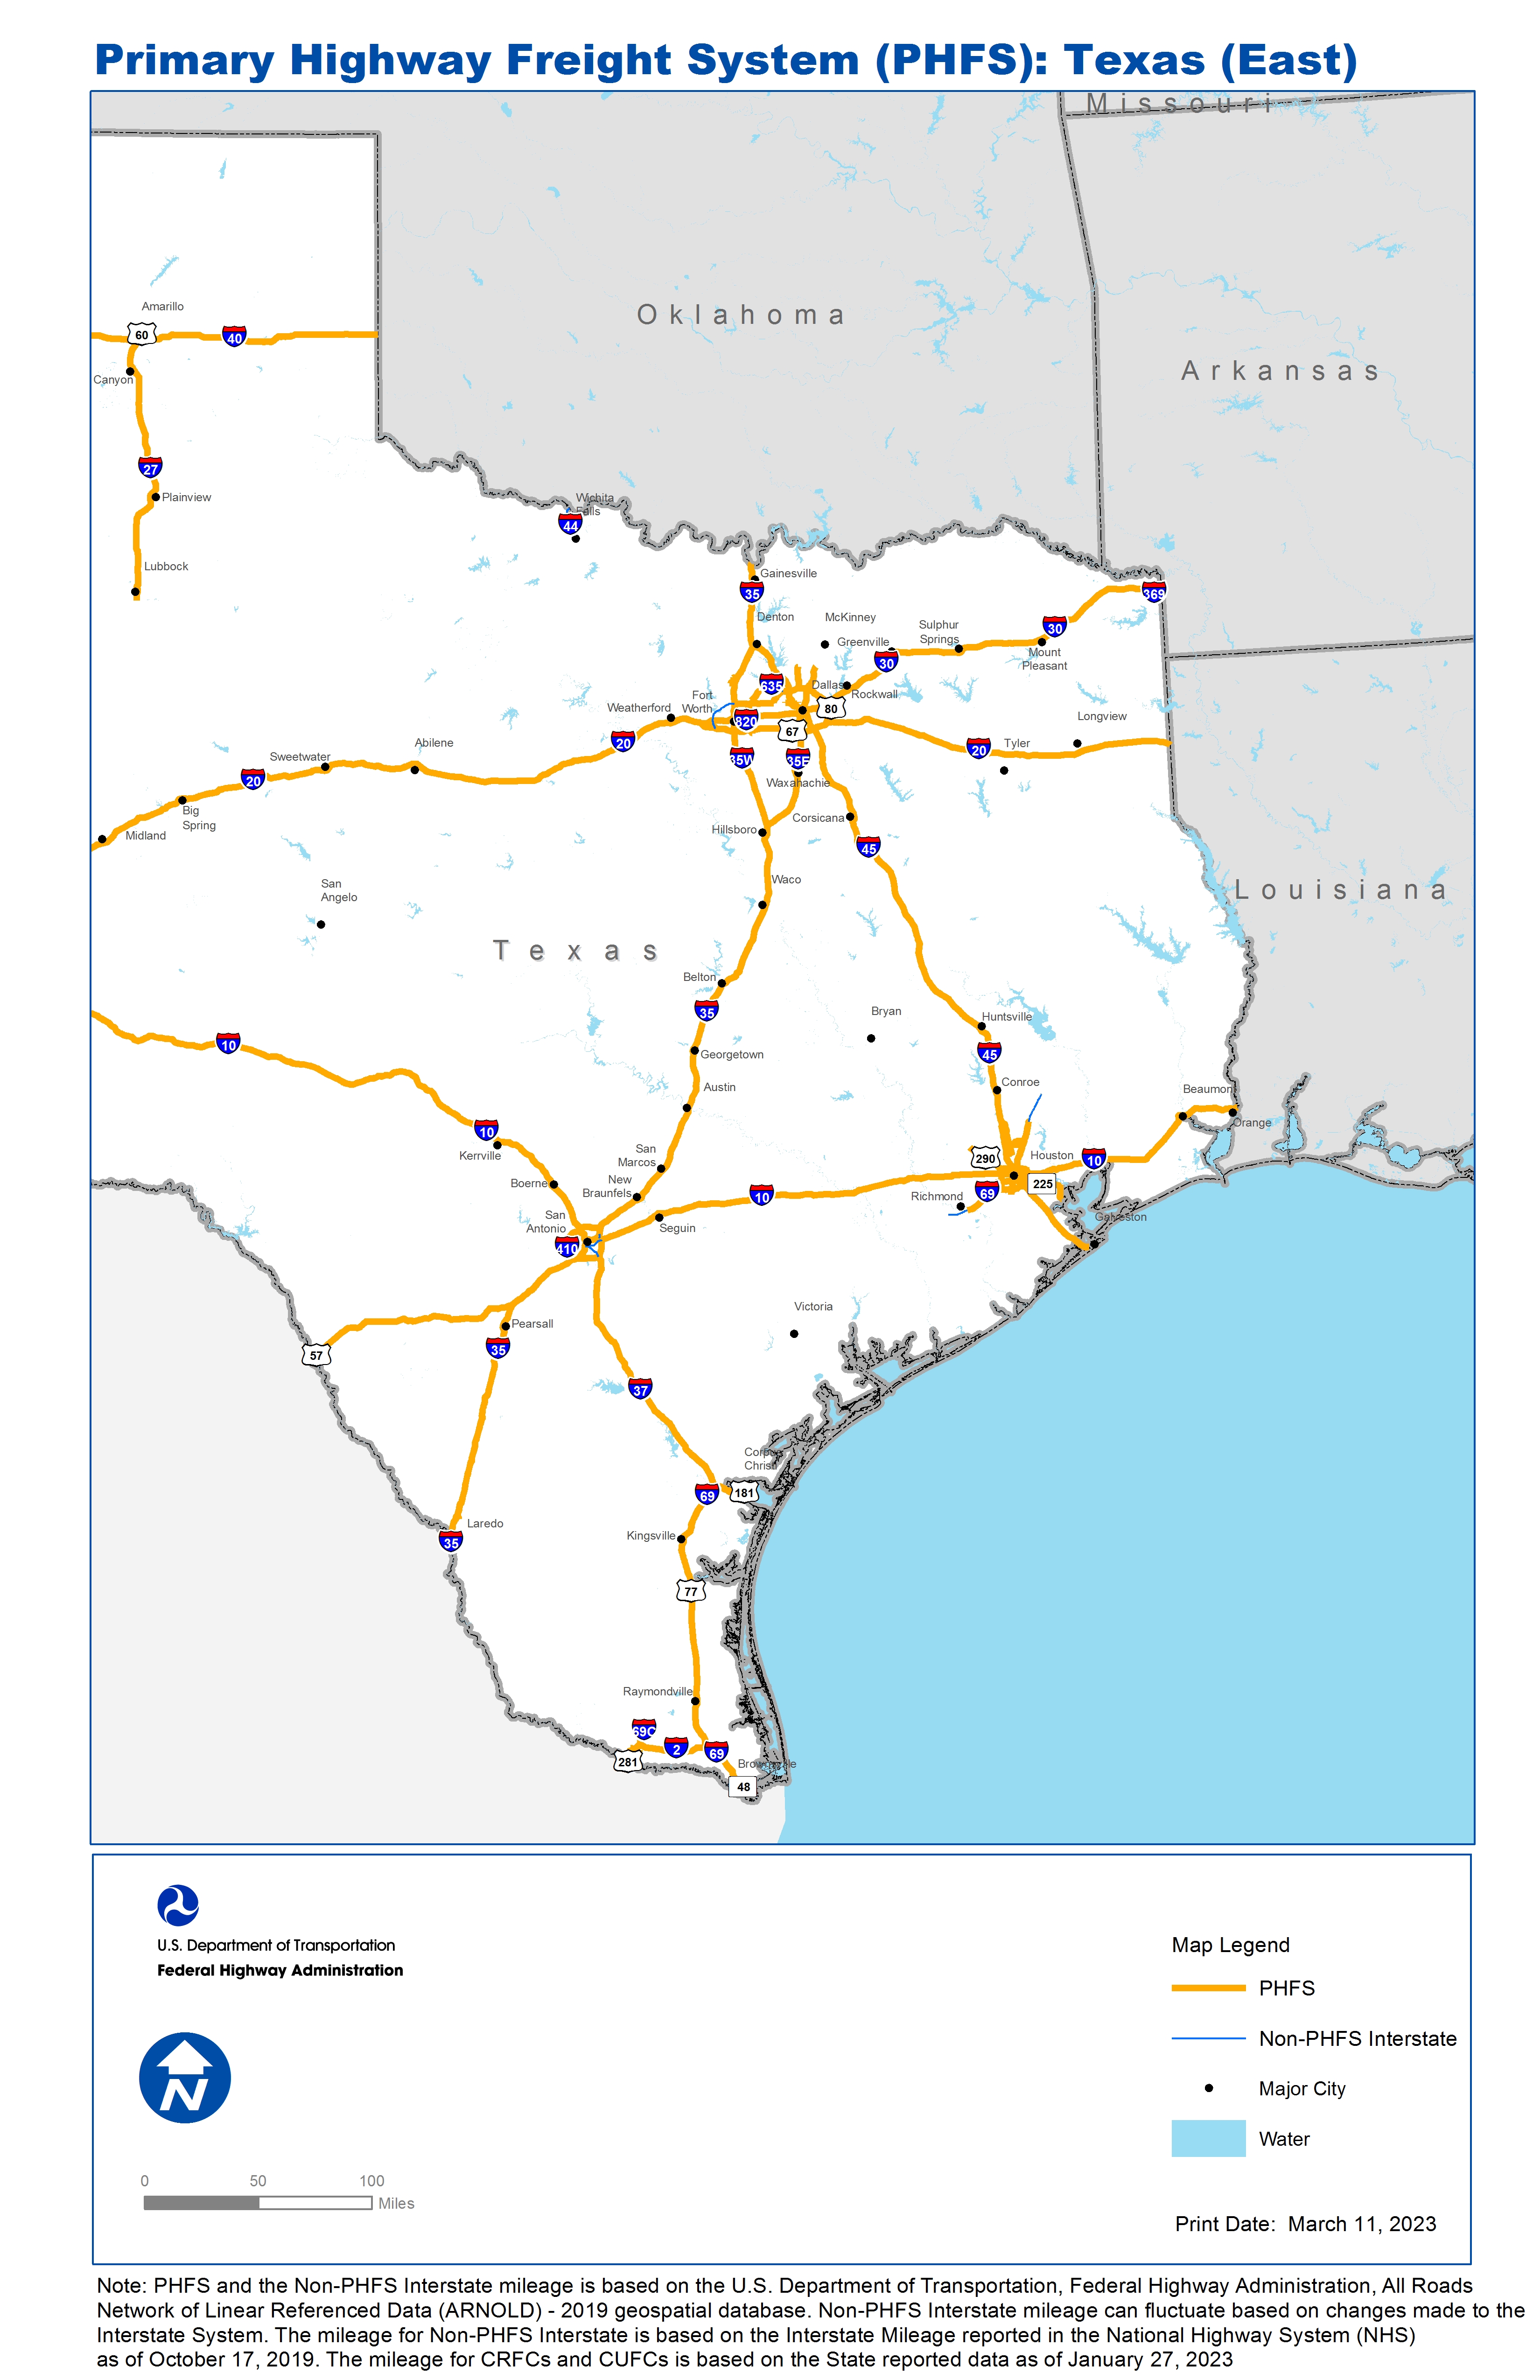 This map shows the Primary Highway Freight System (PHFS) routes of East Texas